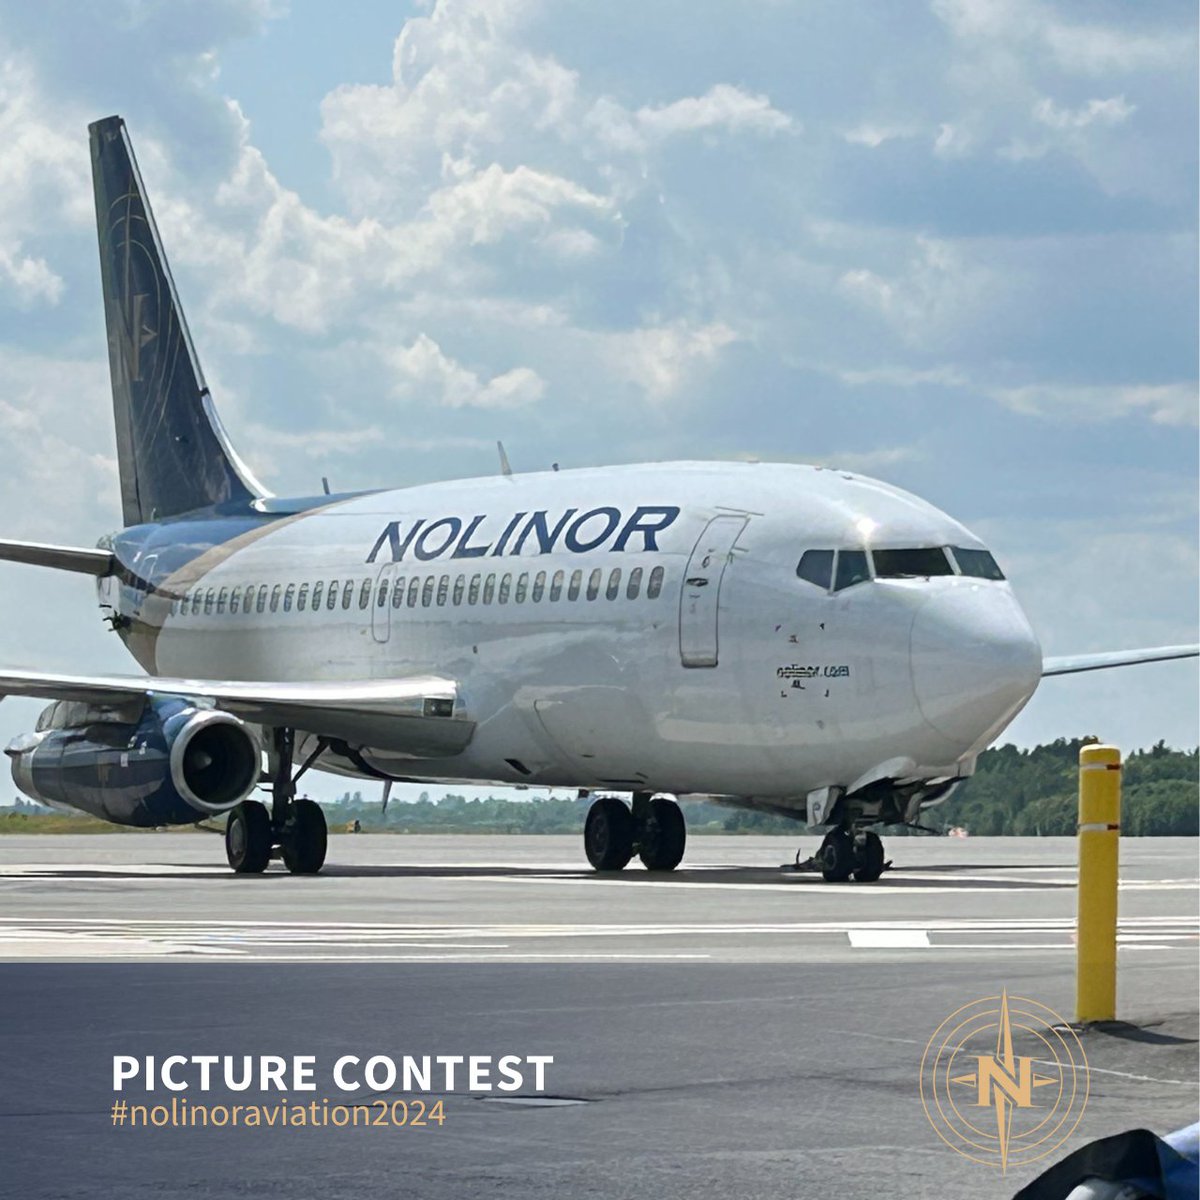 Reminder : Post your best photo of our aircraft using #nolinoraviation2024 to join our contest! ✈️

📸 Tyler Weeks

#nolinor #nolinoraviation #aviation #goldstandard #beyondexpectations #buildingalegendontime #biggestfleet #30yearsexperience #realairline #b737200